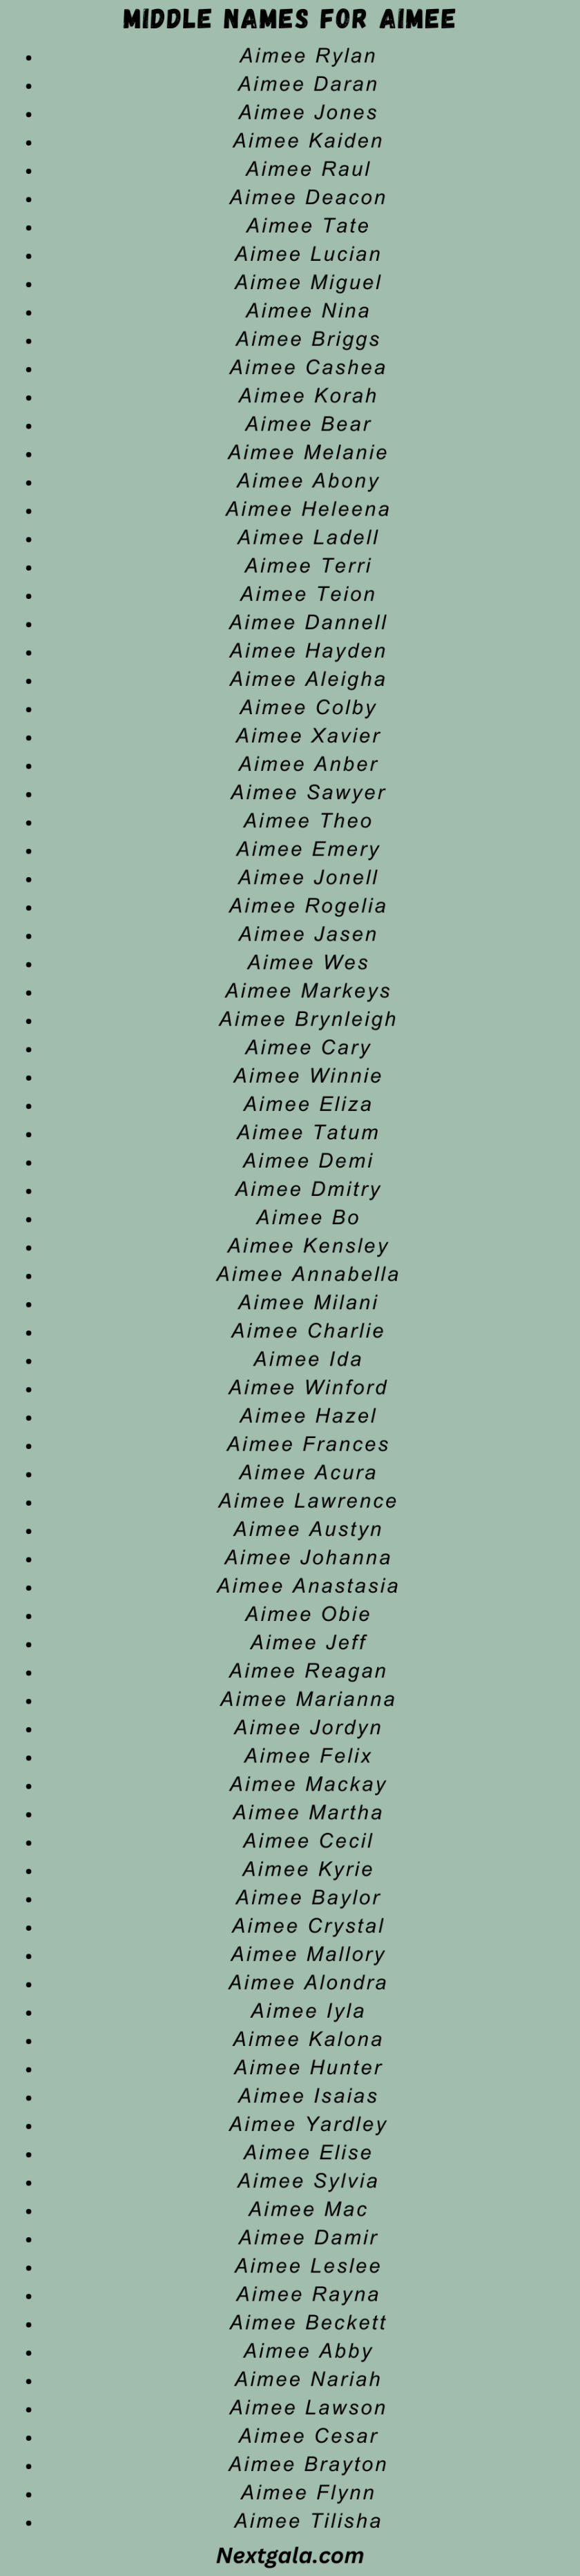 Middle Names for Aimee